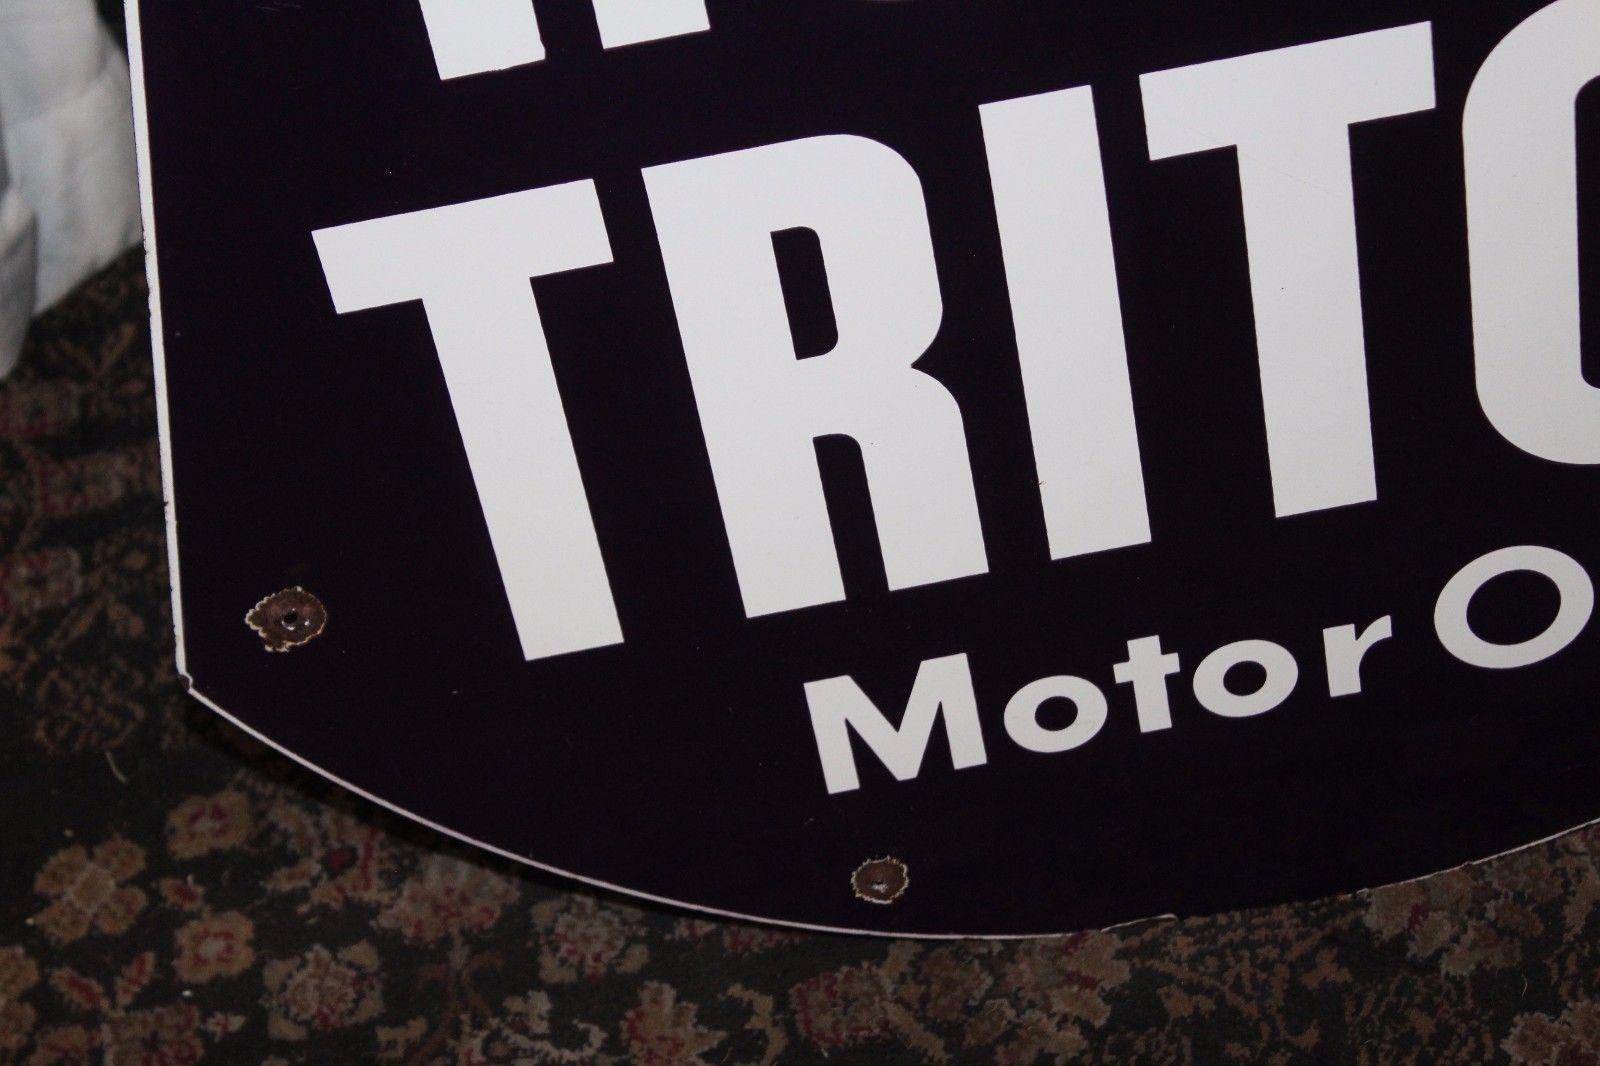 1950s Royal Triton Motor Oil Double-Sided Porcelain Sign For Sale 5